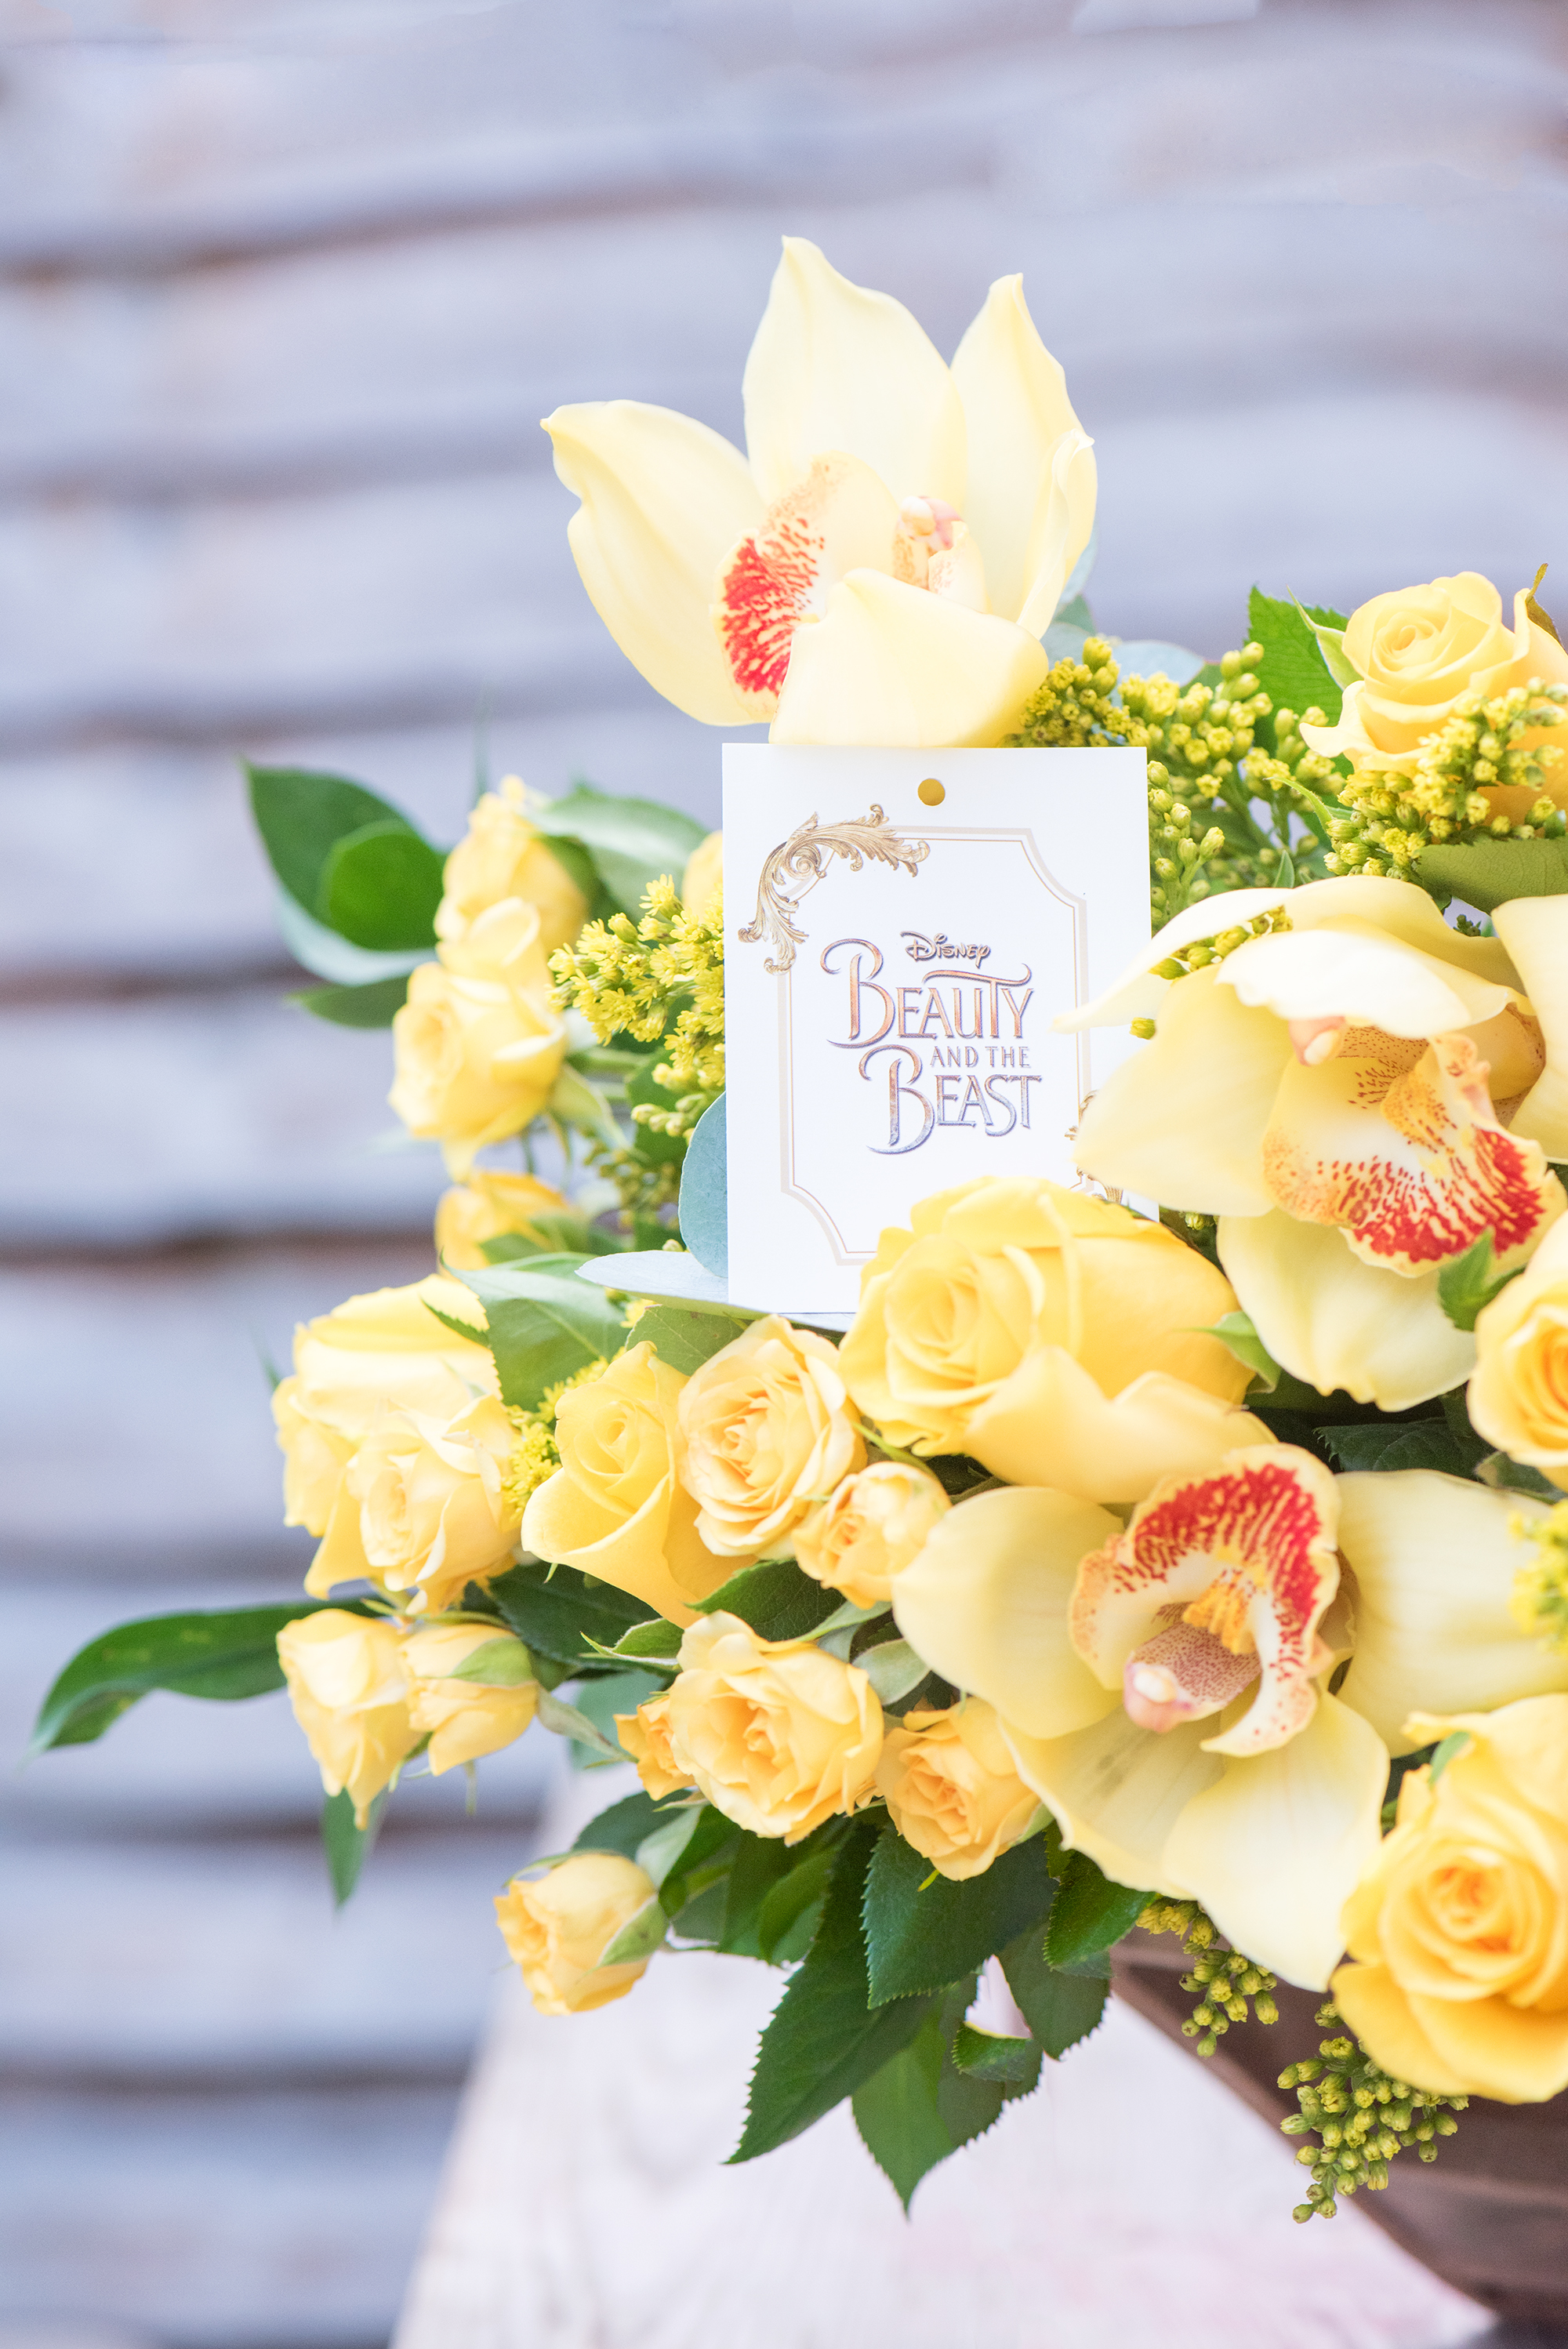 FLOWERS FOR A PRINCESS: A BEAUTY AND THE BEAST SURPRISE